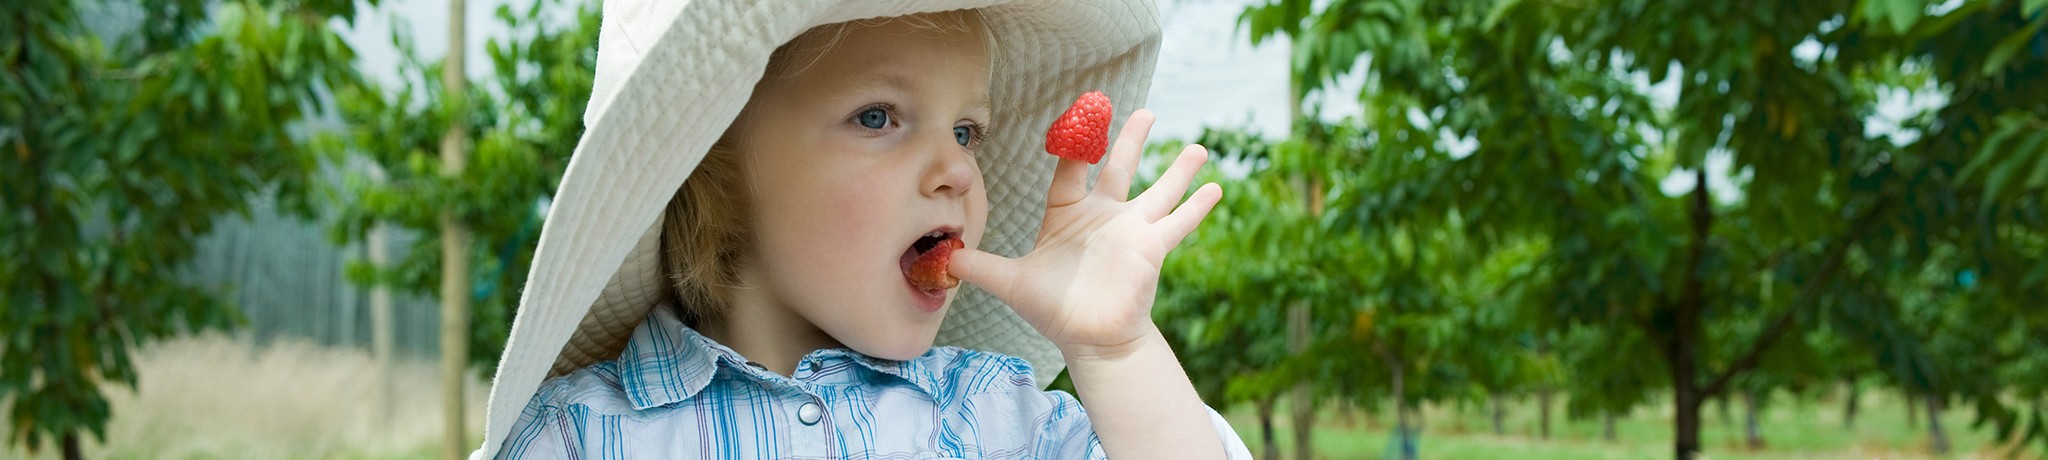 Child eating strawberries off of fingers